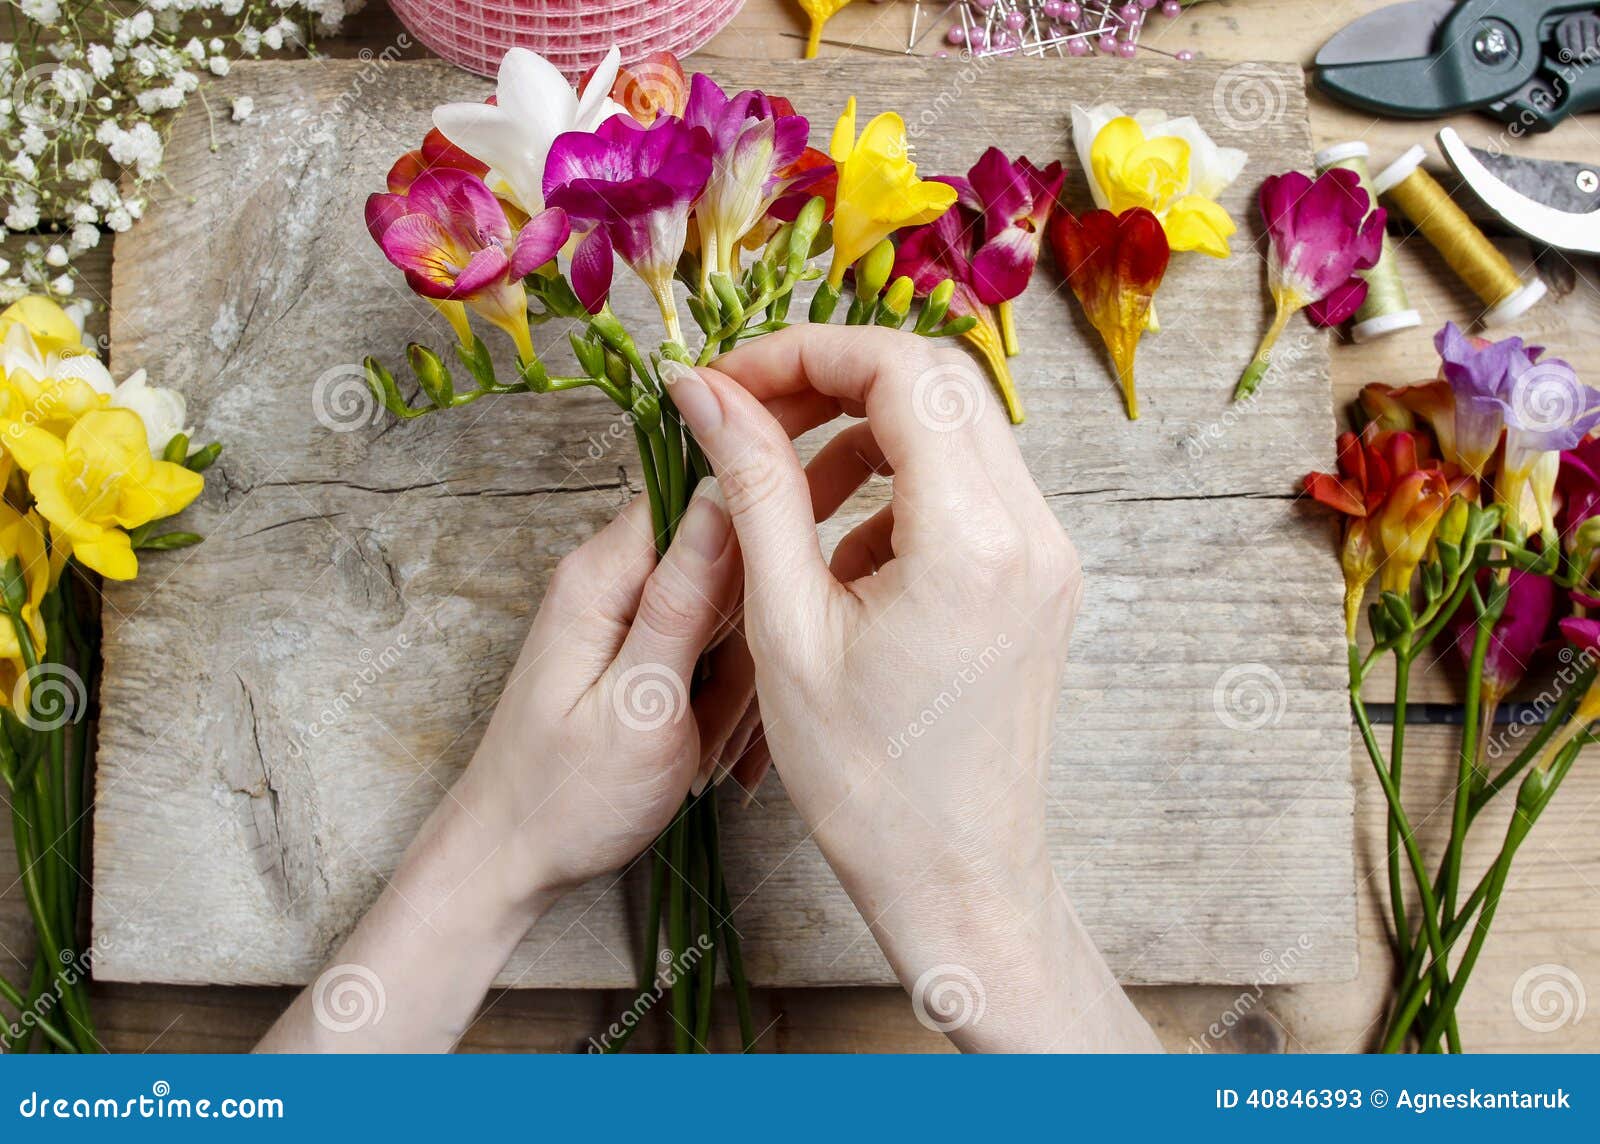 florist at work. woman making bouquet of freesia flowers